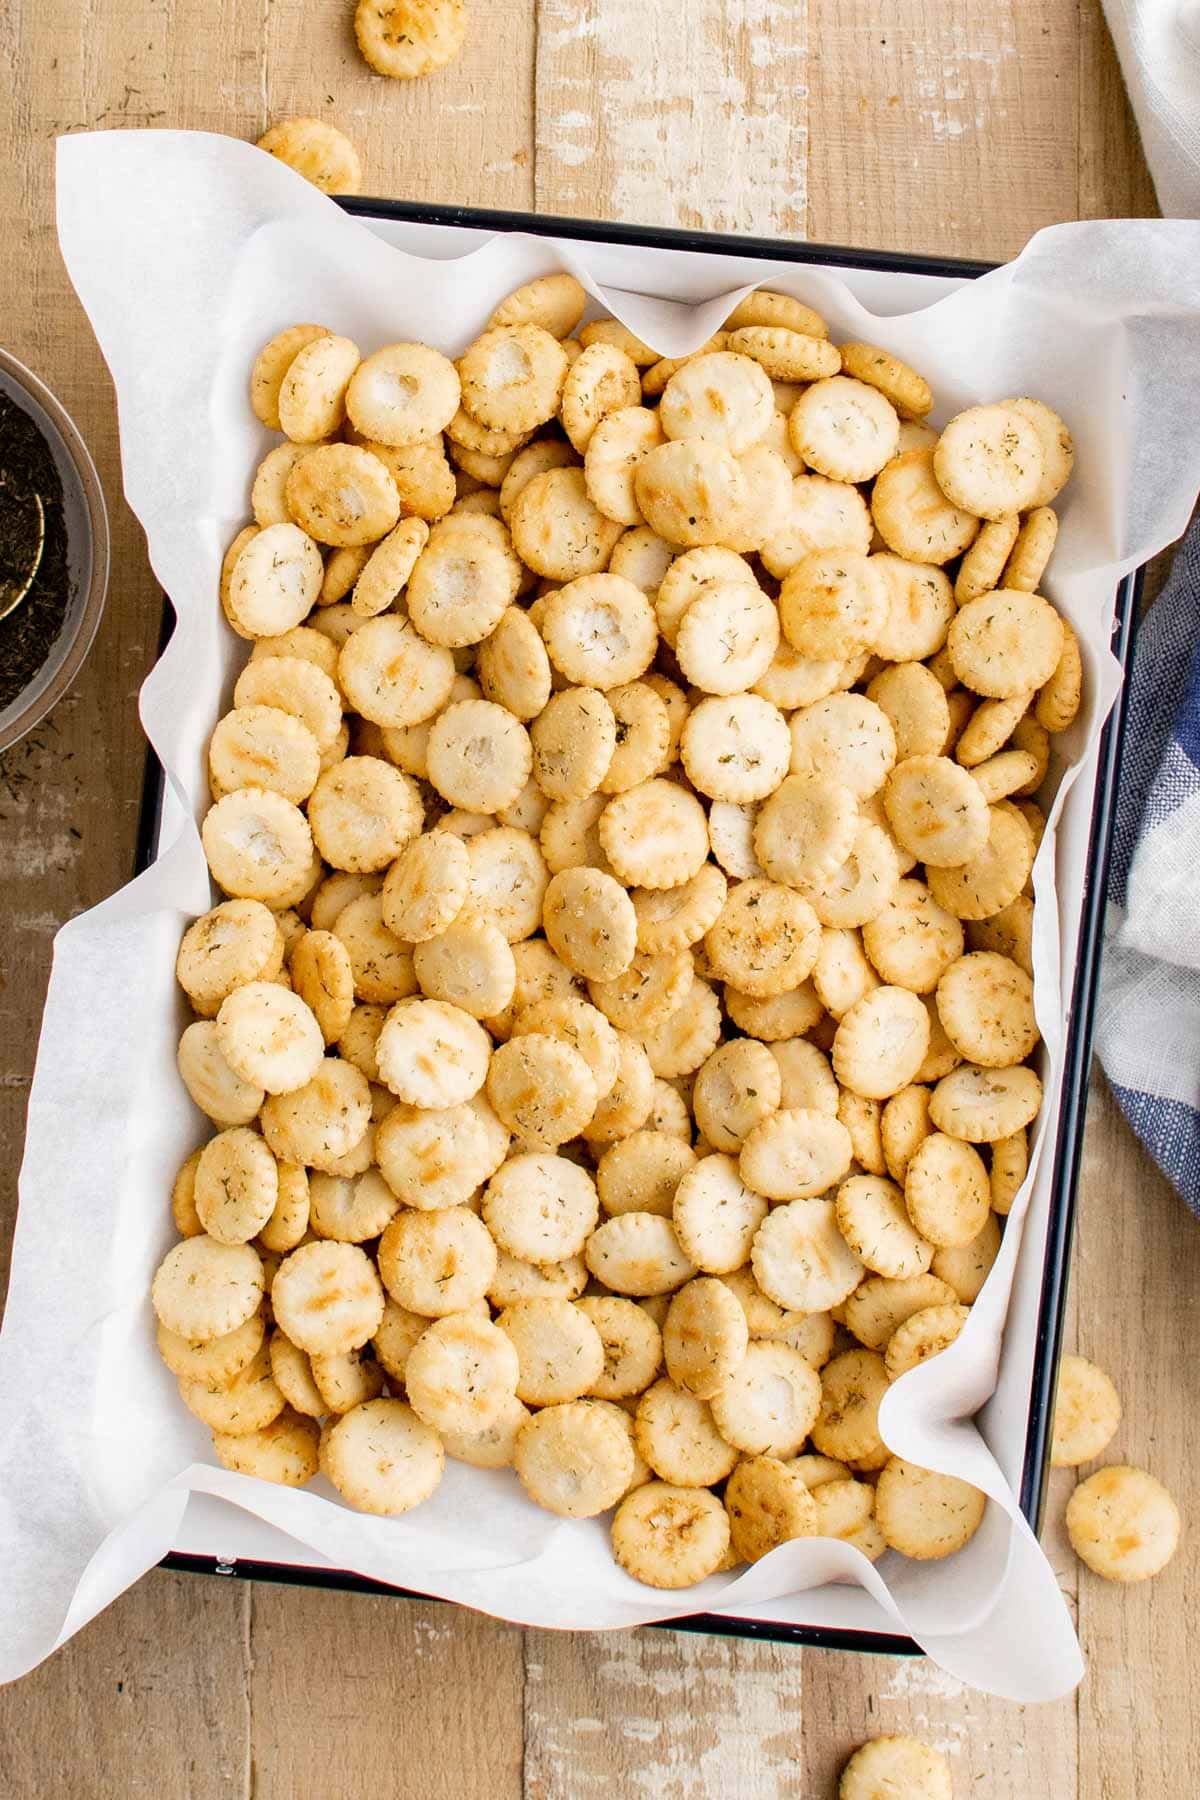 Oyster crackers in a rectangular dish with parchment paper